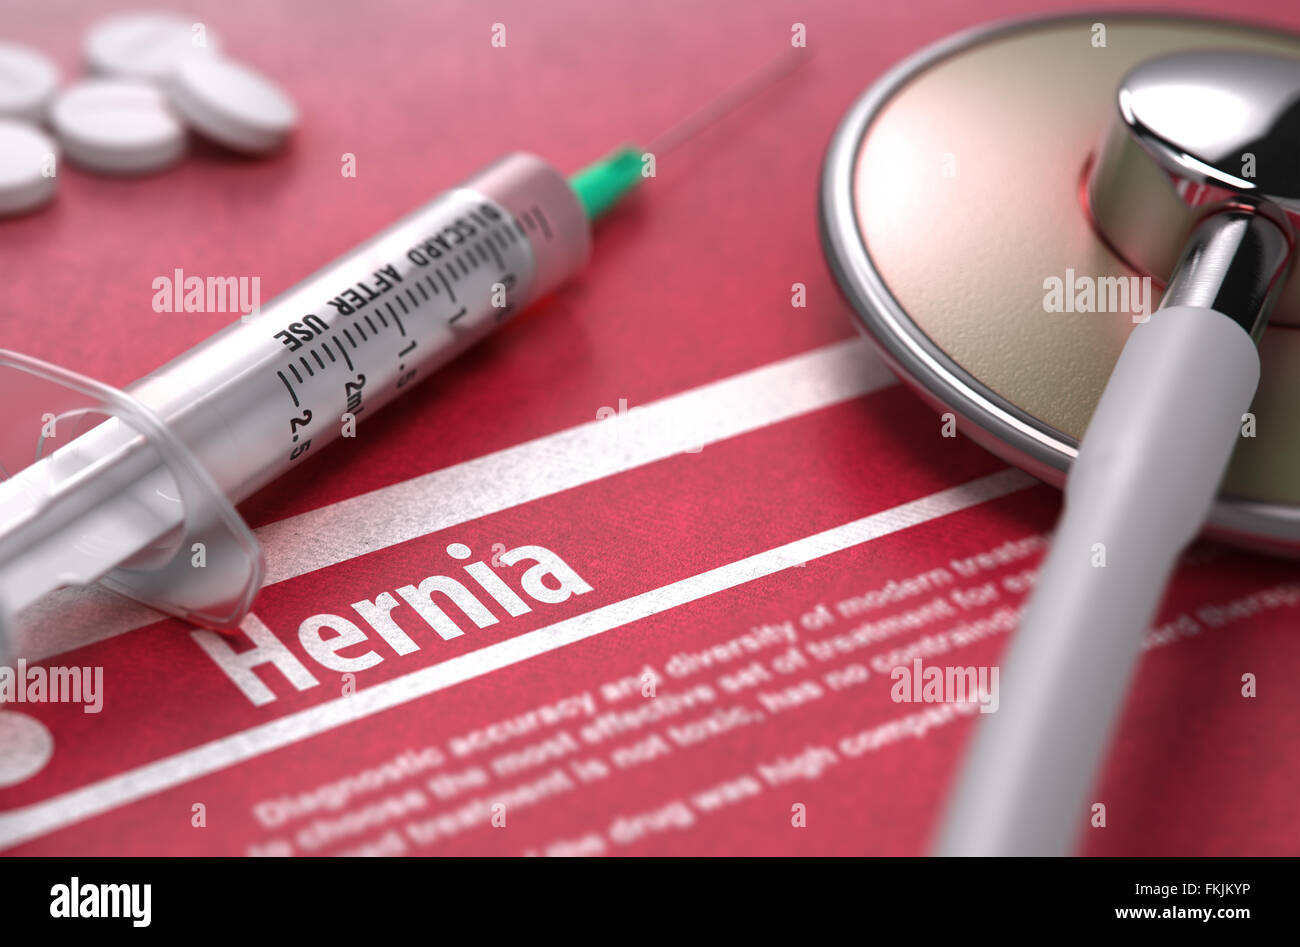 Hernia. Medical Concept on Red Background. Stock Photo